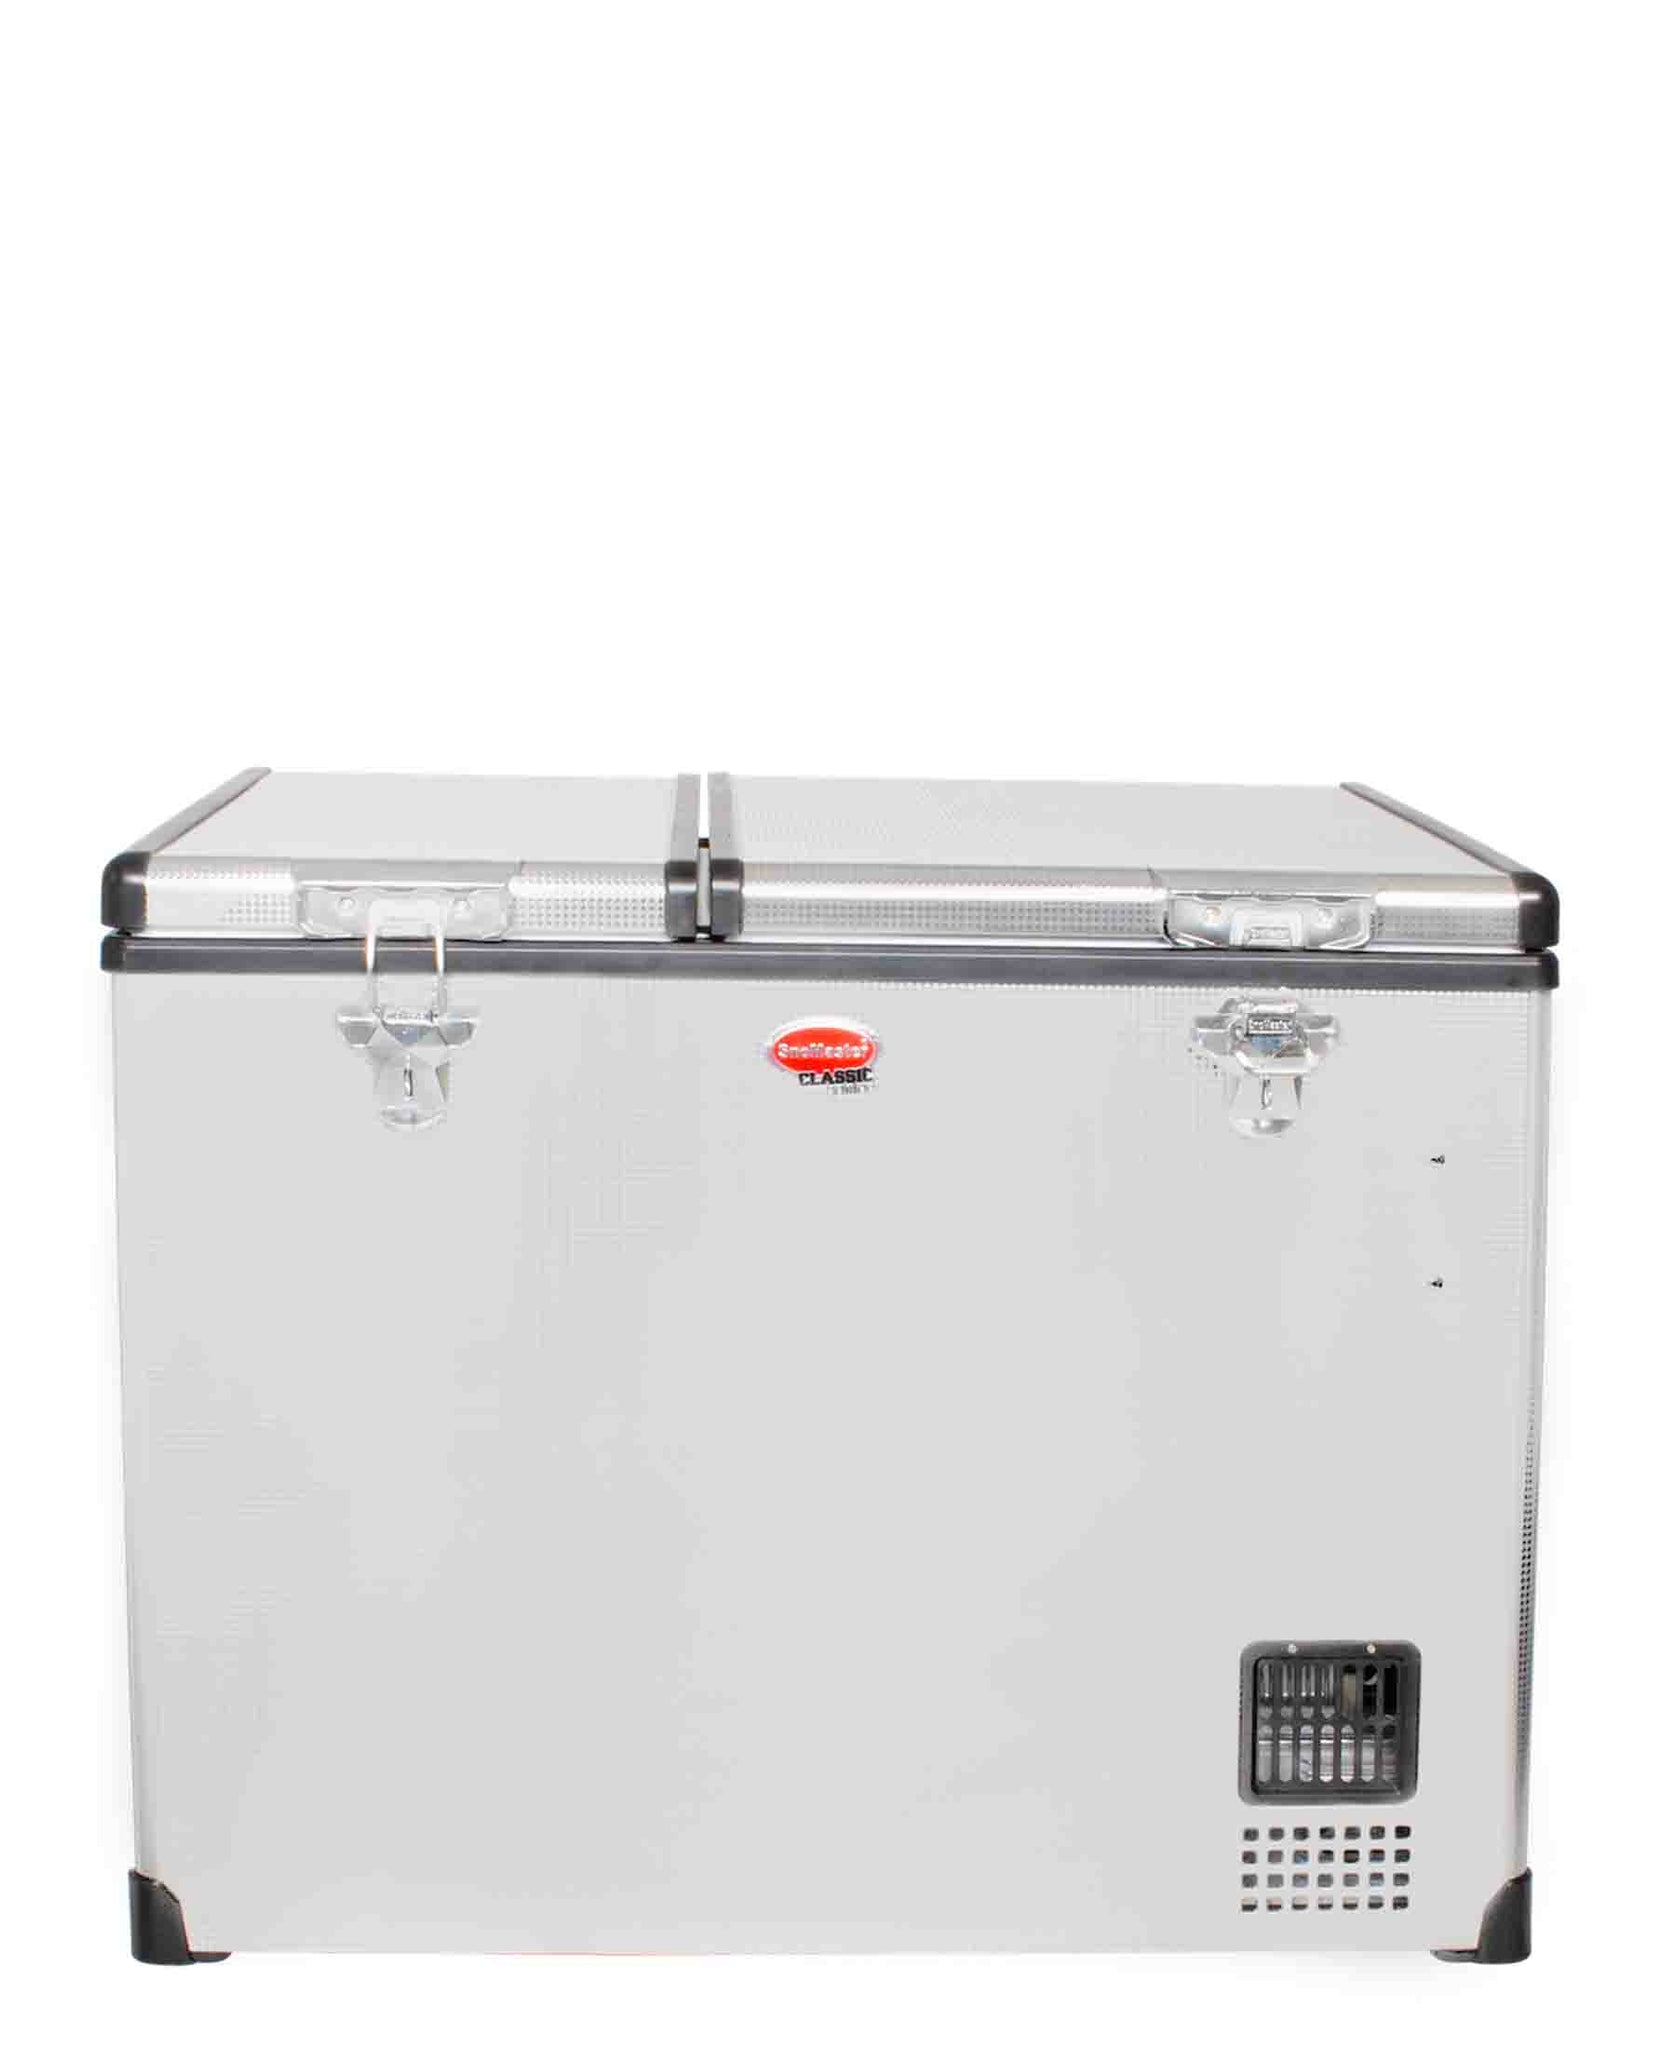 SnoMaster 72L Dual Compartment Camping Freezer - Silver